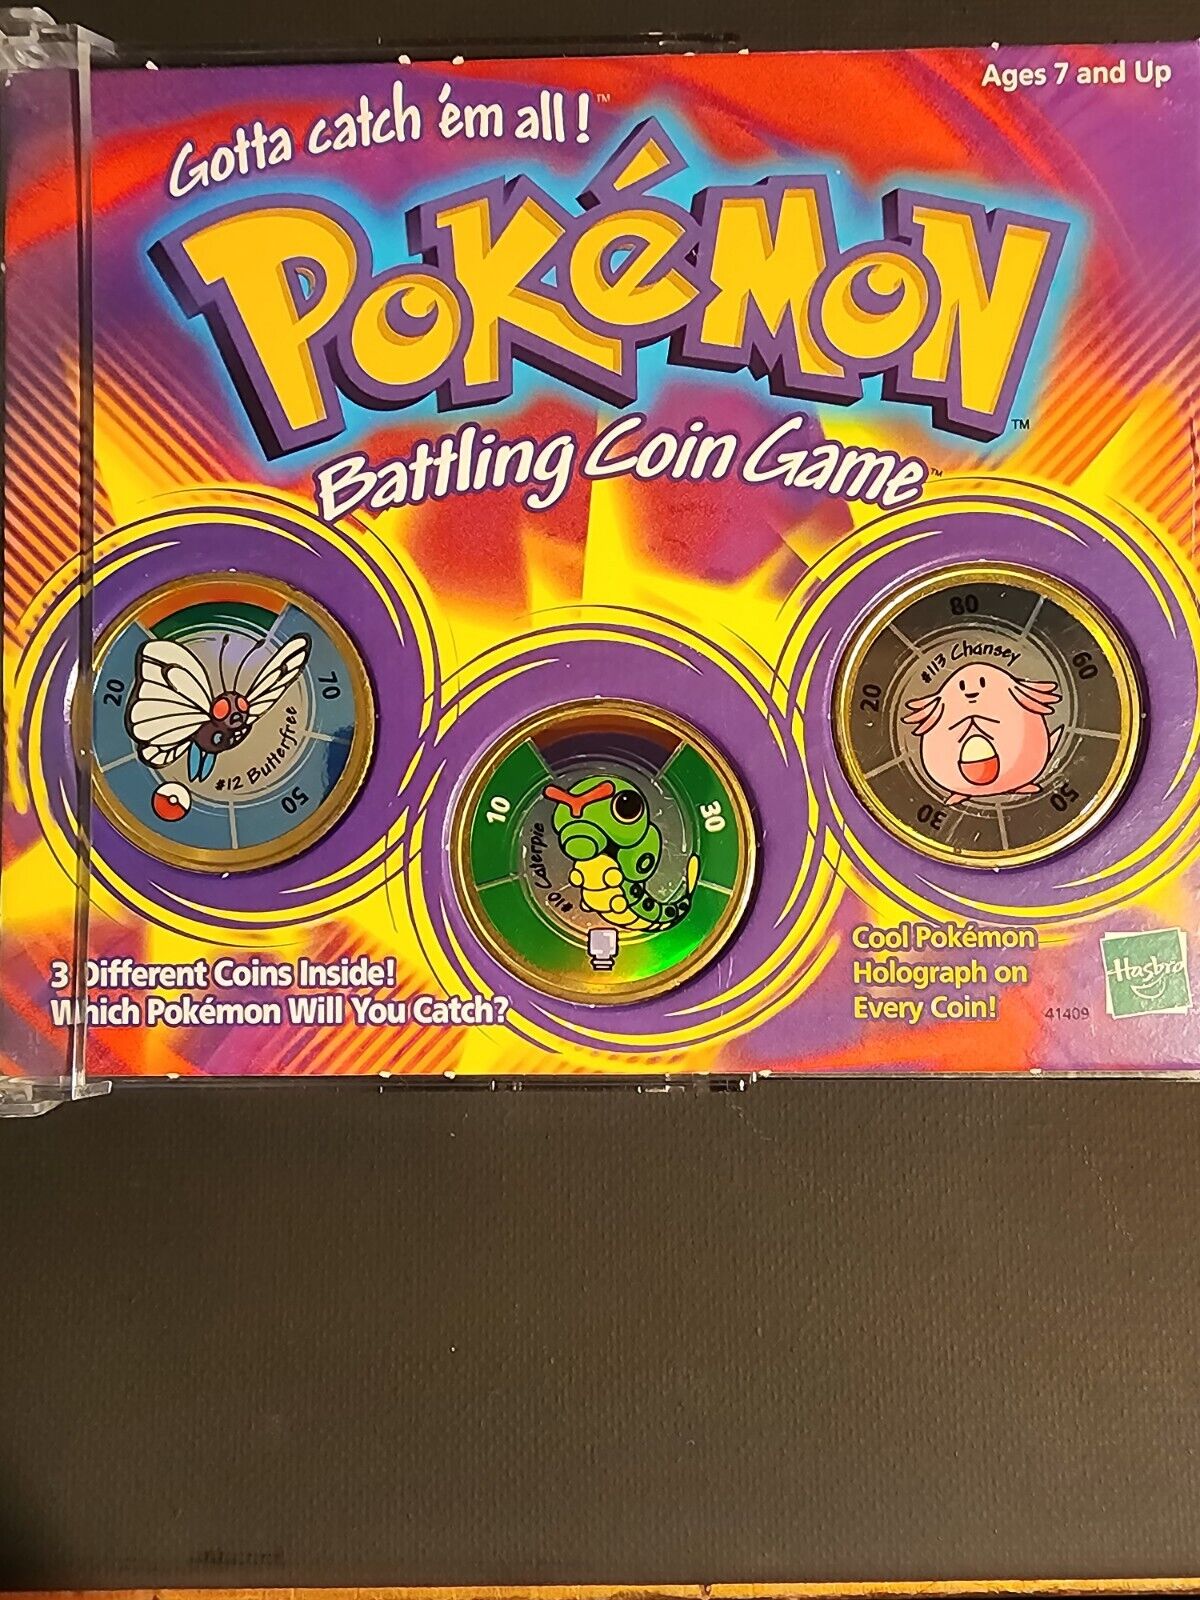 Pokémon Battling Coin Game 1999 Butterfree  Caterpie Chansey